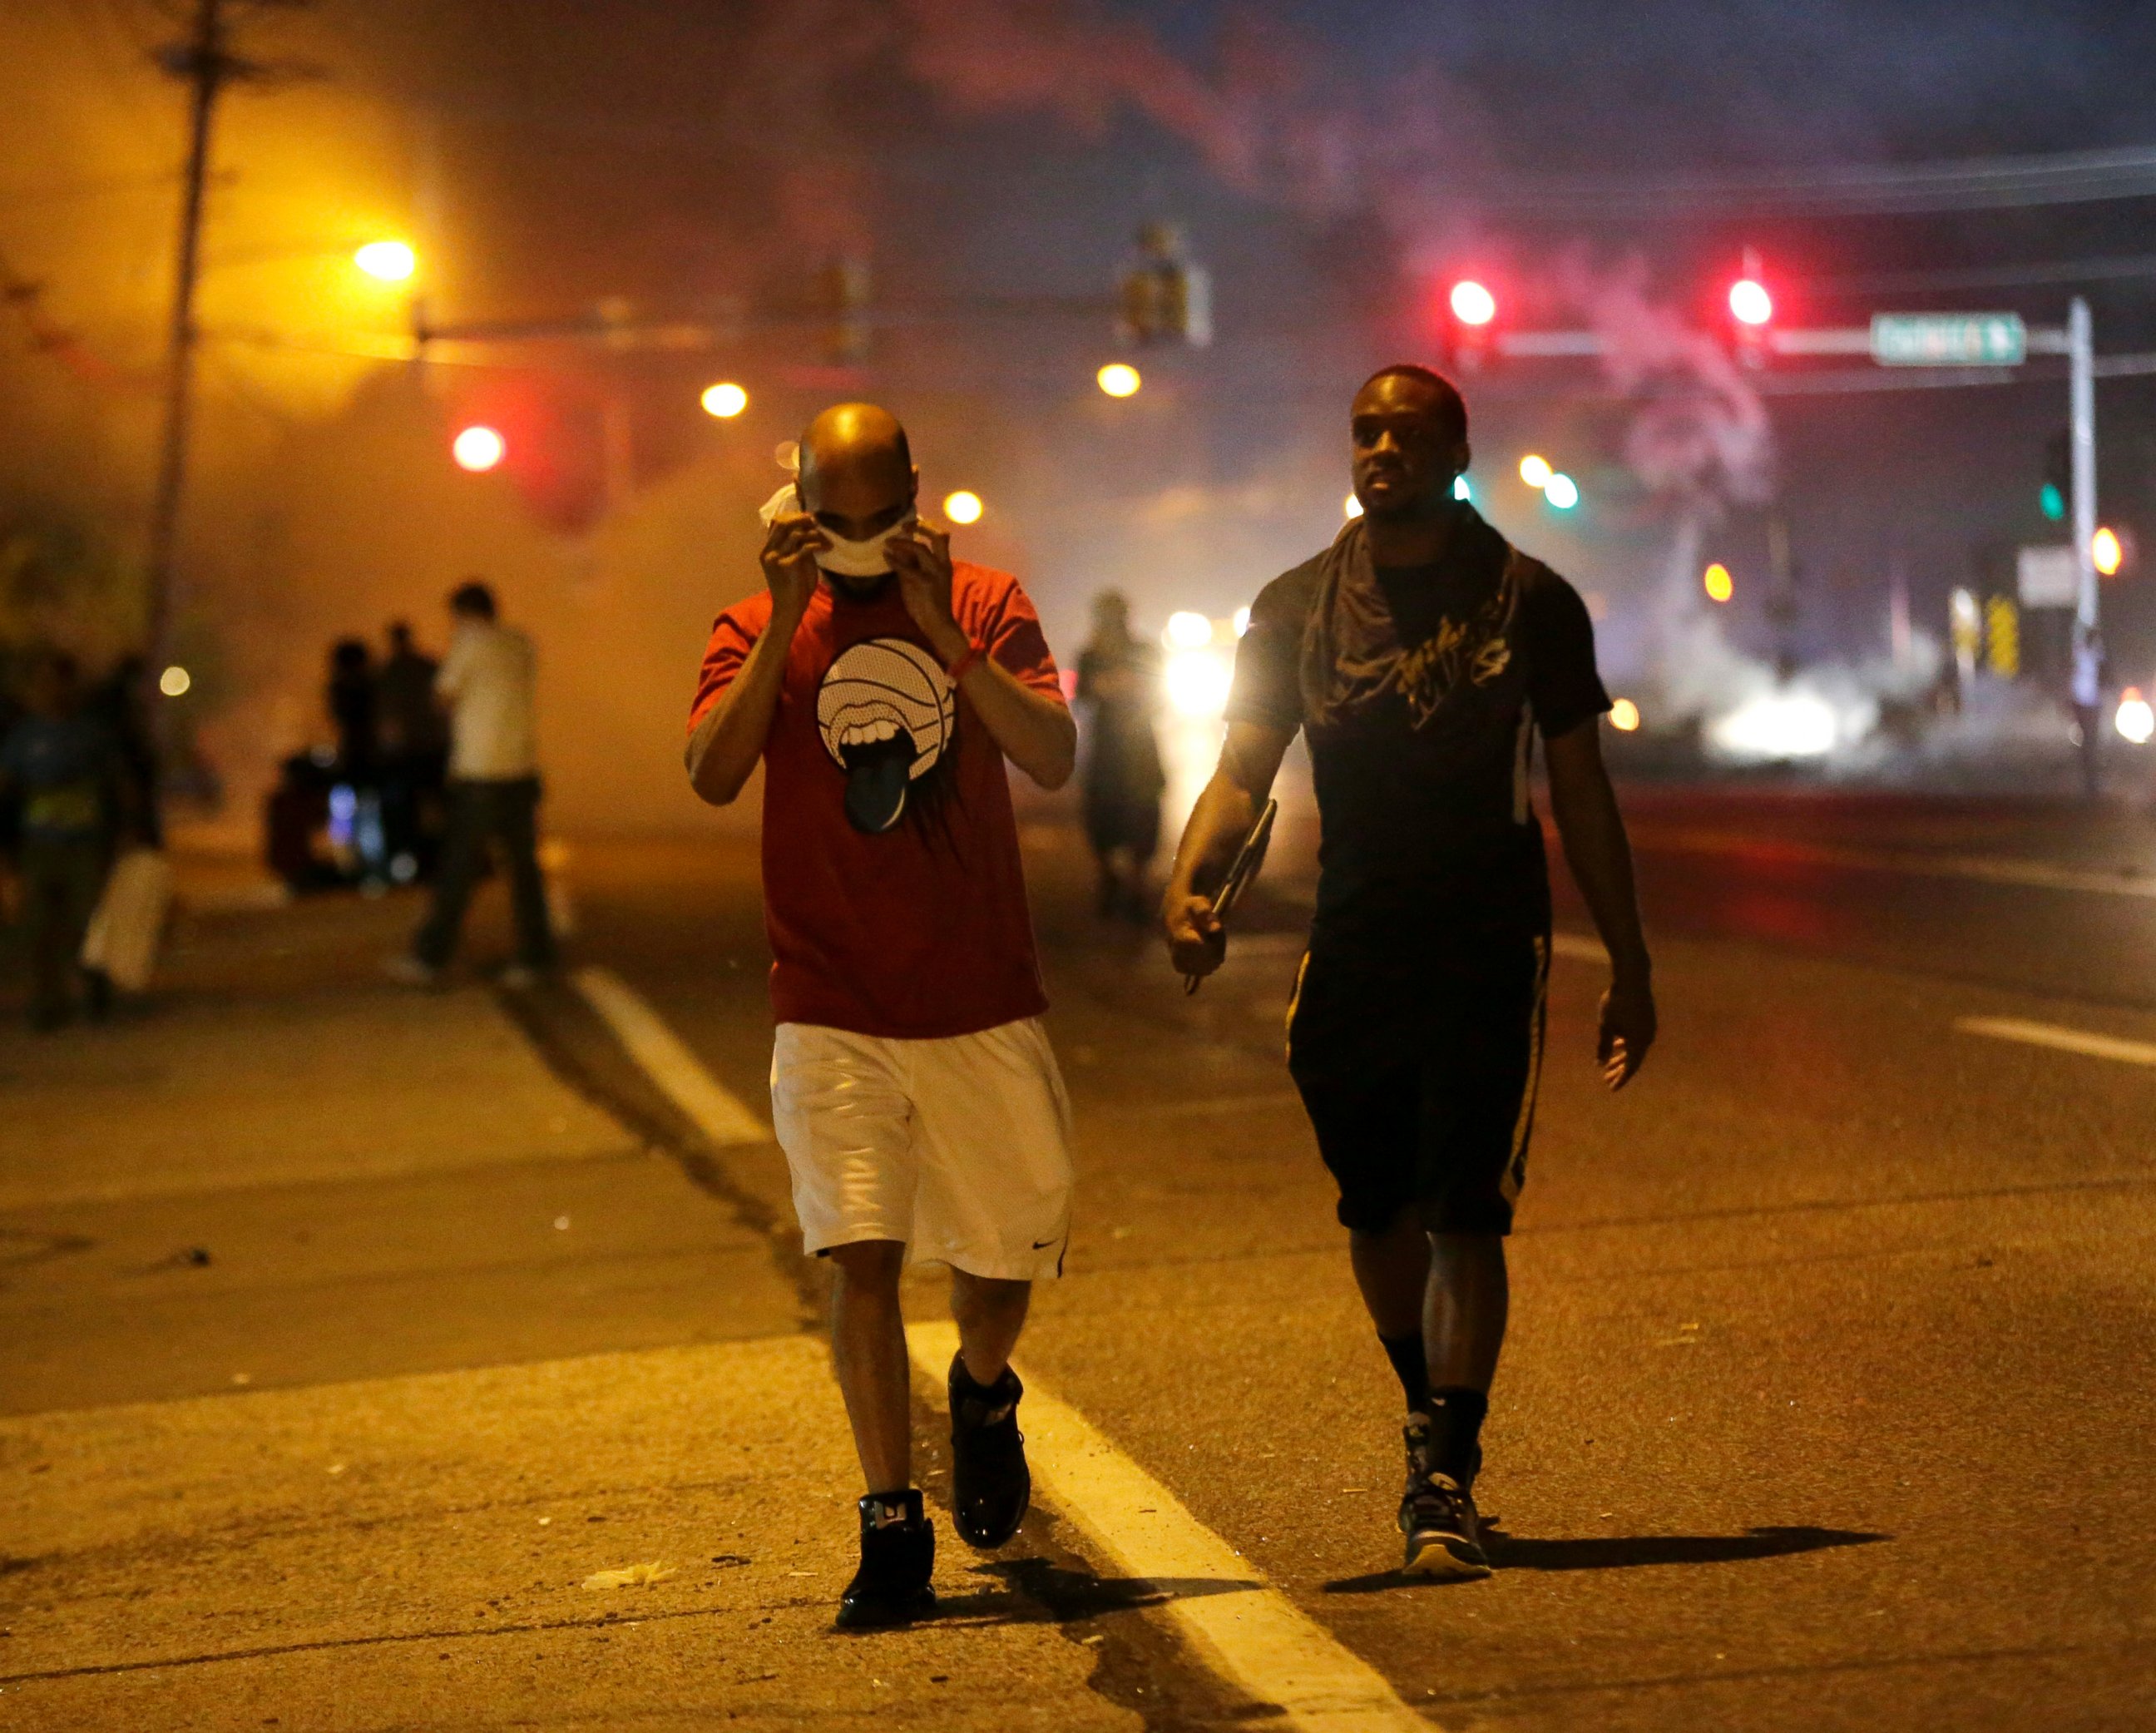 PHOTO: Men walk away from a cloud of tear gas during a protest, Aug. 18, 2014, in Ferguson, Mo.